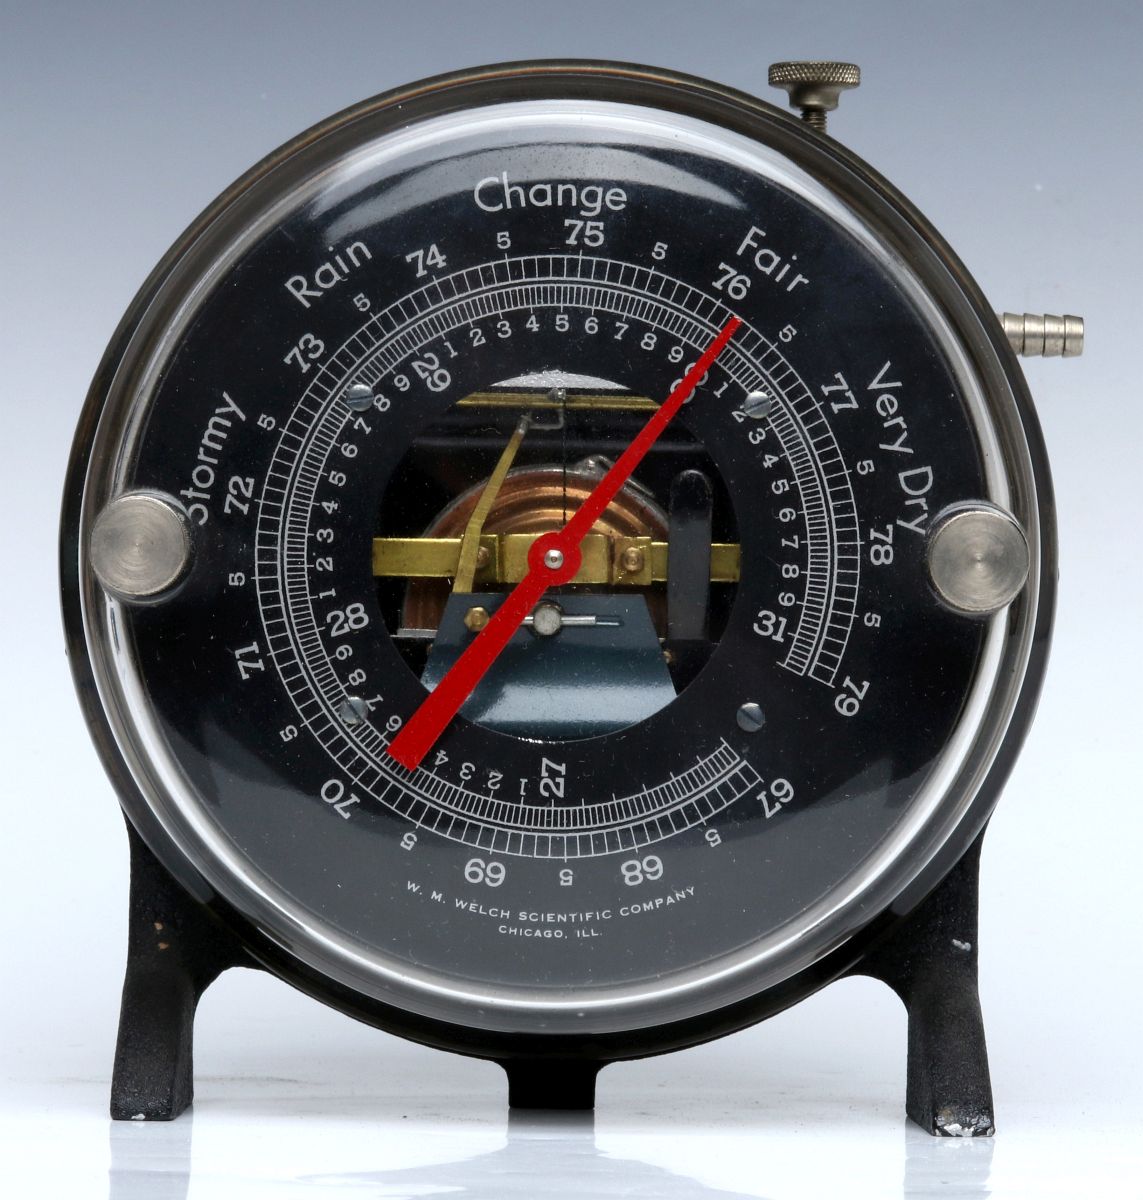 A VINTAGE BAROMETER MADE BY WELCH SCIENTIFIC